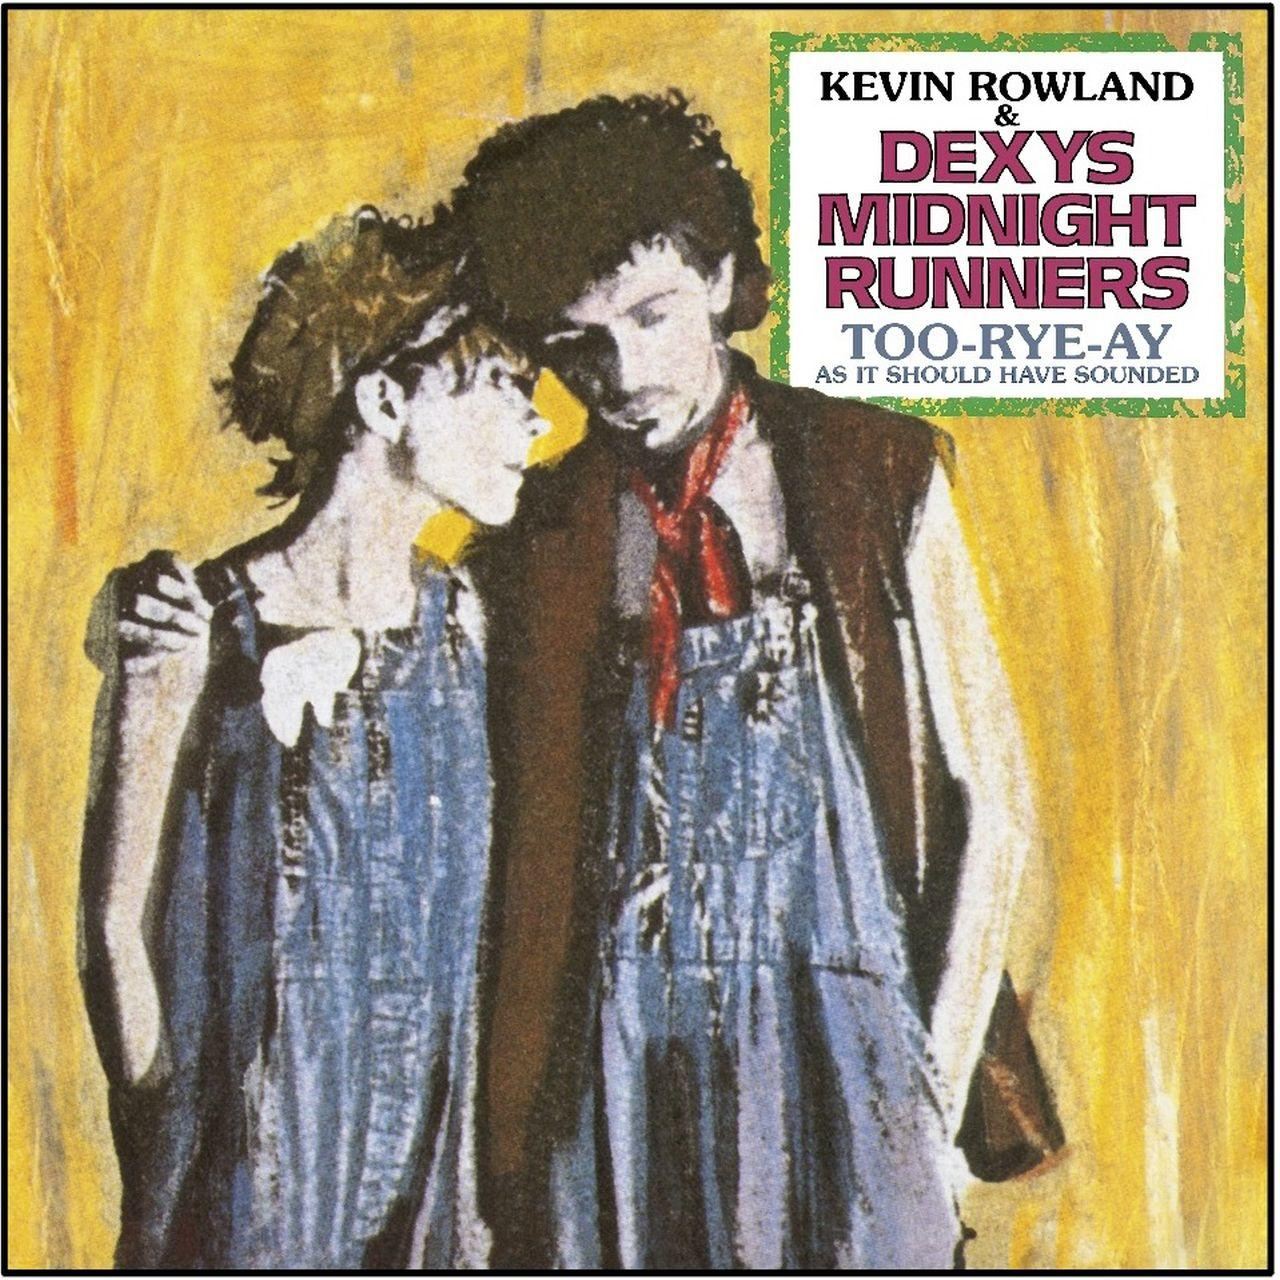 Kevin Rowland & Dexy\'s Remix) Sounded Too-Rye-Ay, Have Edition) Midnight Runners As - - (Deluxe Should (40th Anniversary It (CD)